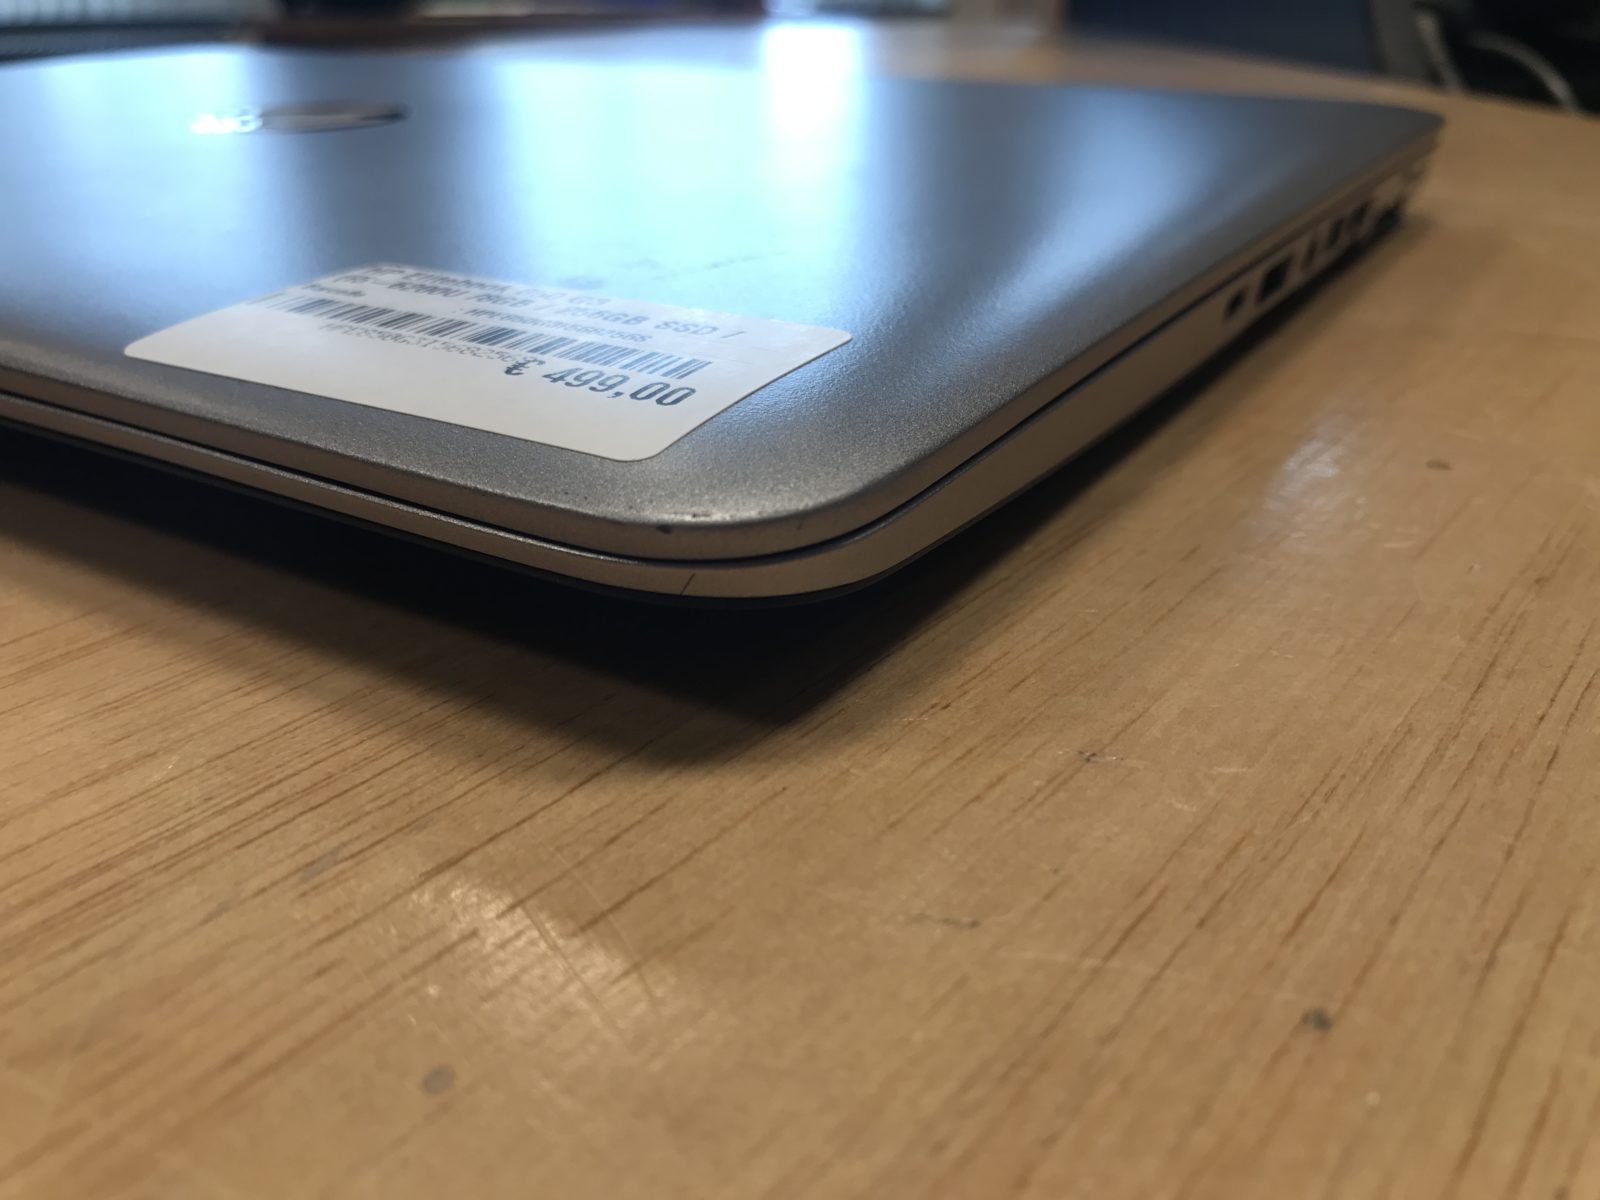 Sample laptop with A-grade.